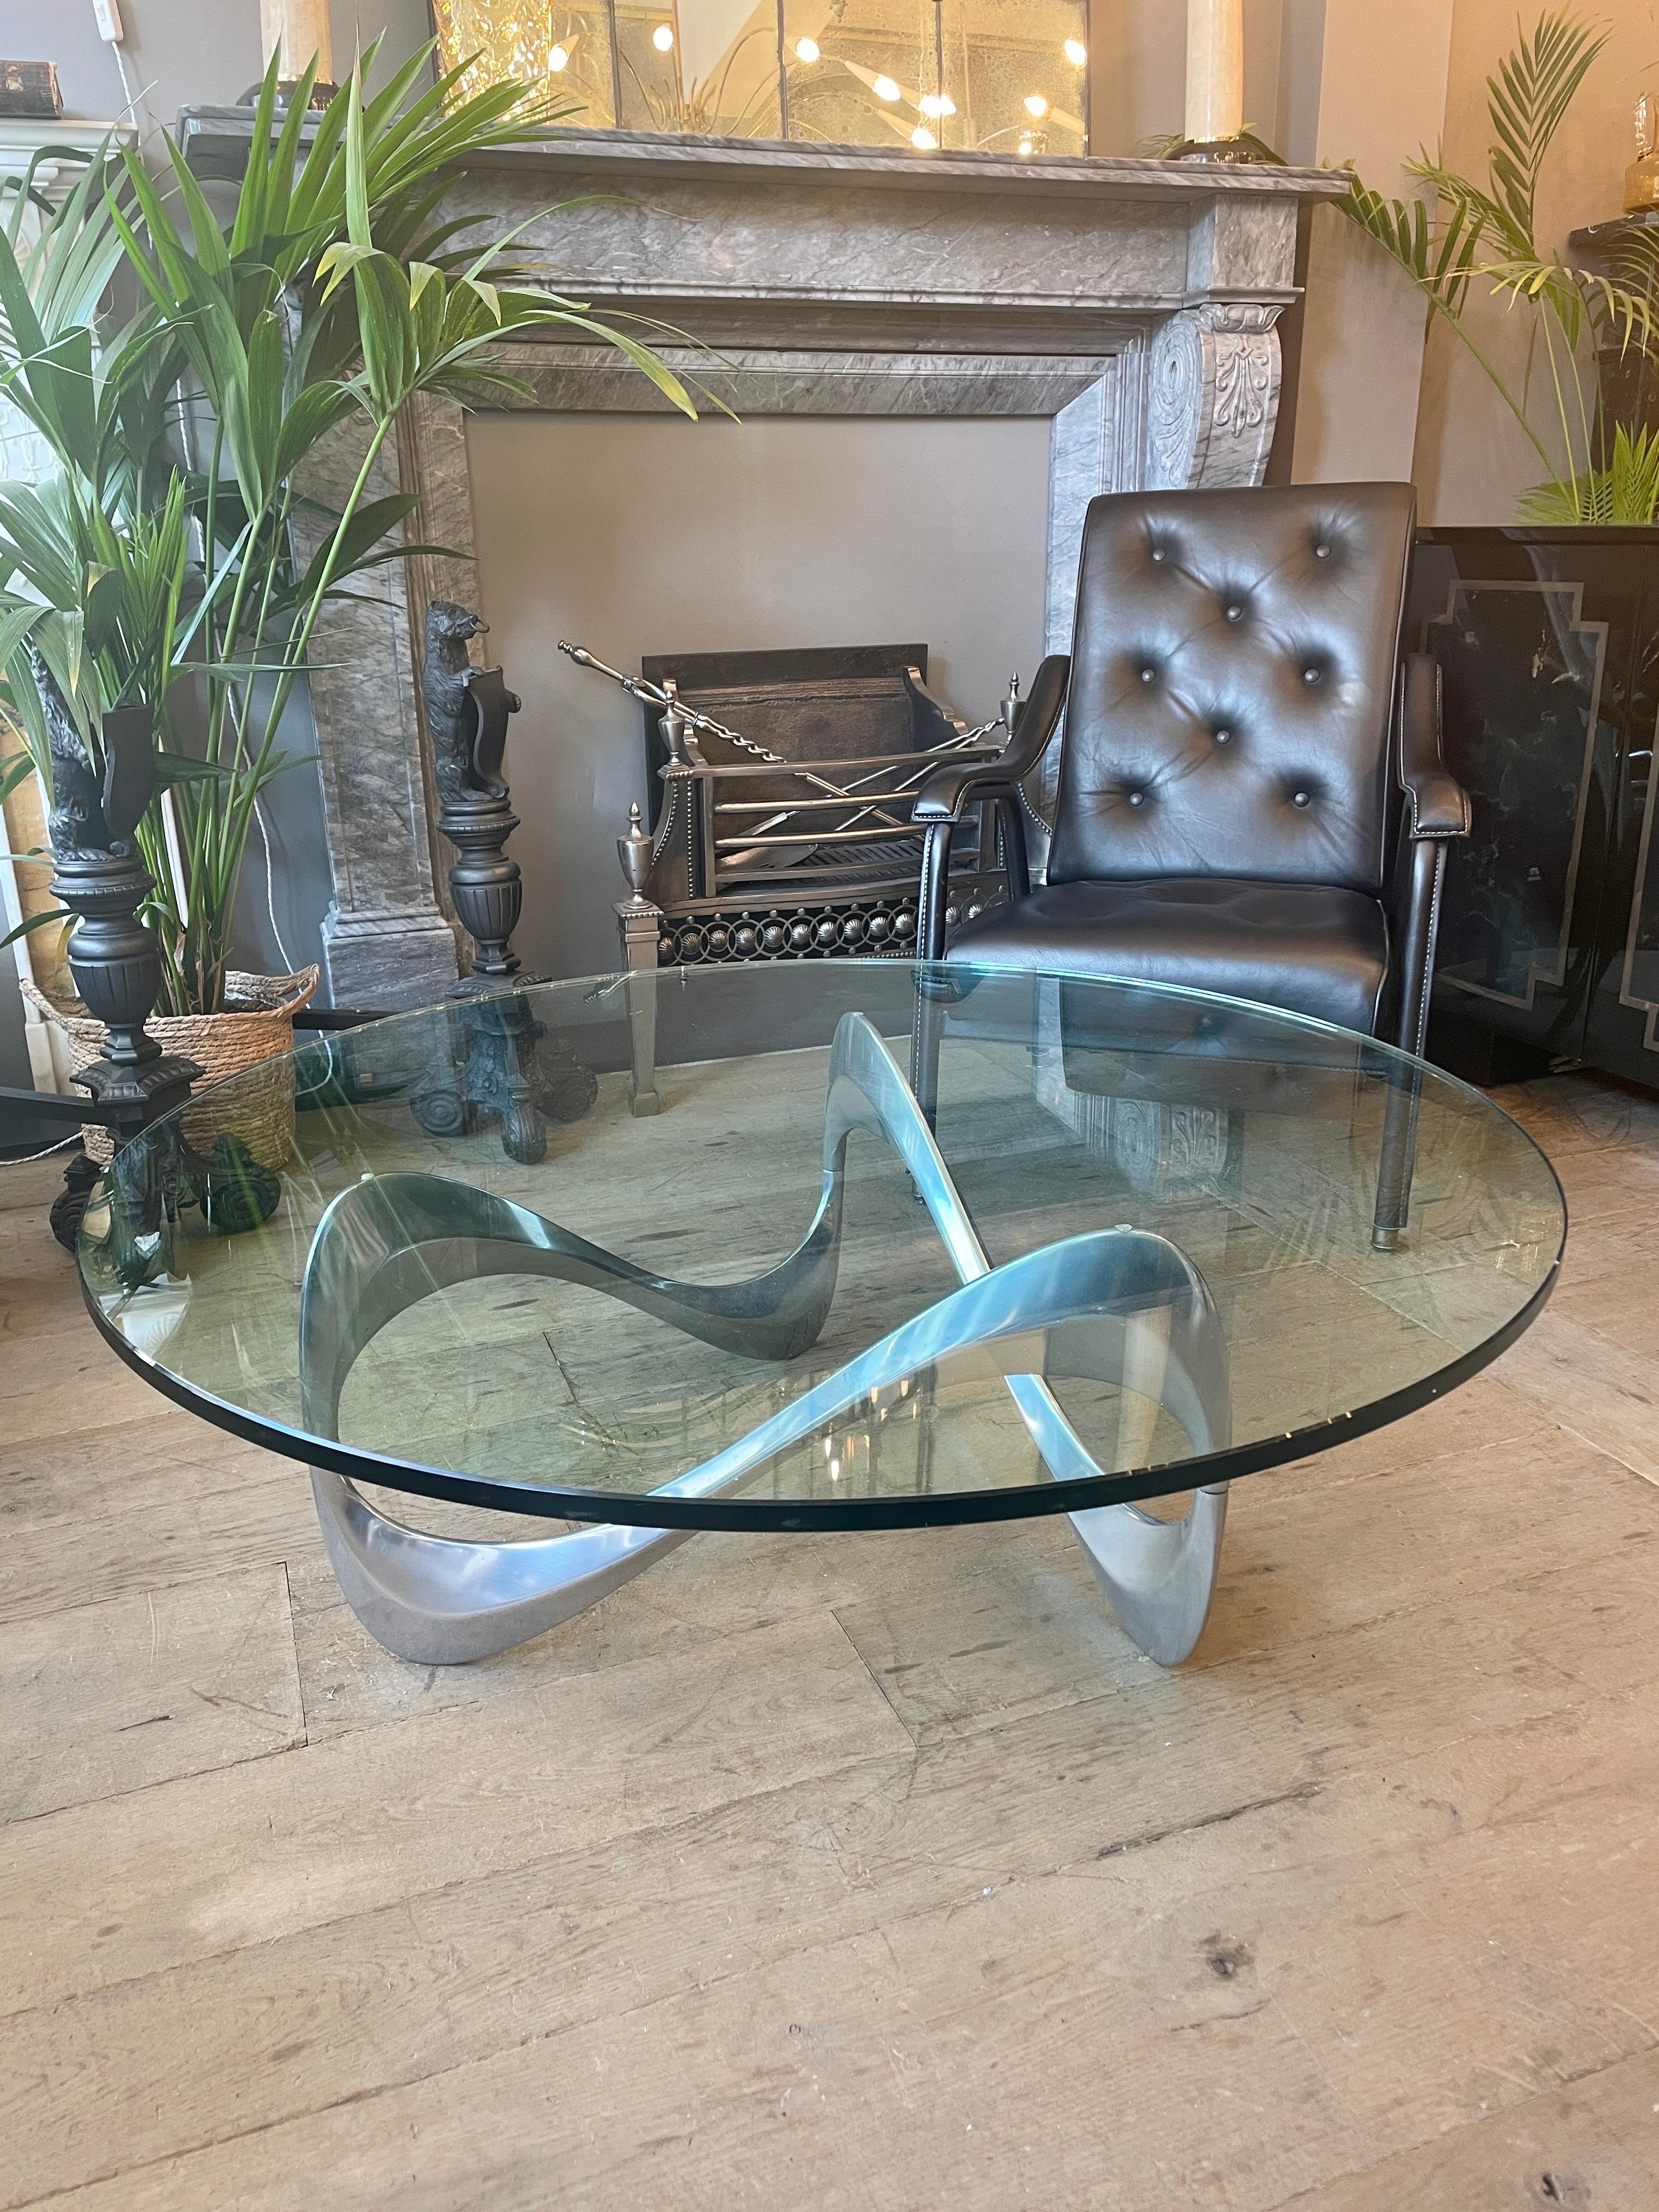 Iconic ’Snake’ coffee table designed in 1965 by Knut Hesterberg for Ronald Schmitt Organic shaped aluminium base supports heavy round shaped original glass top Table. In good condition both original glass top and base.